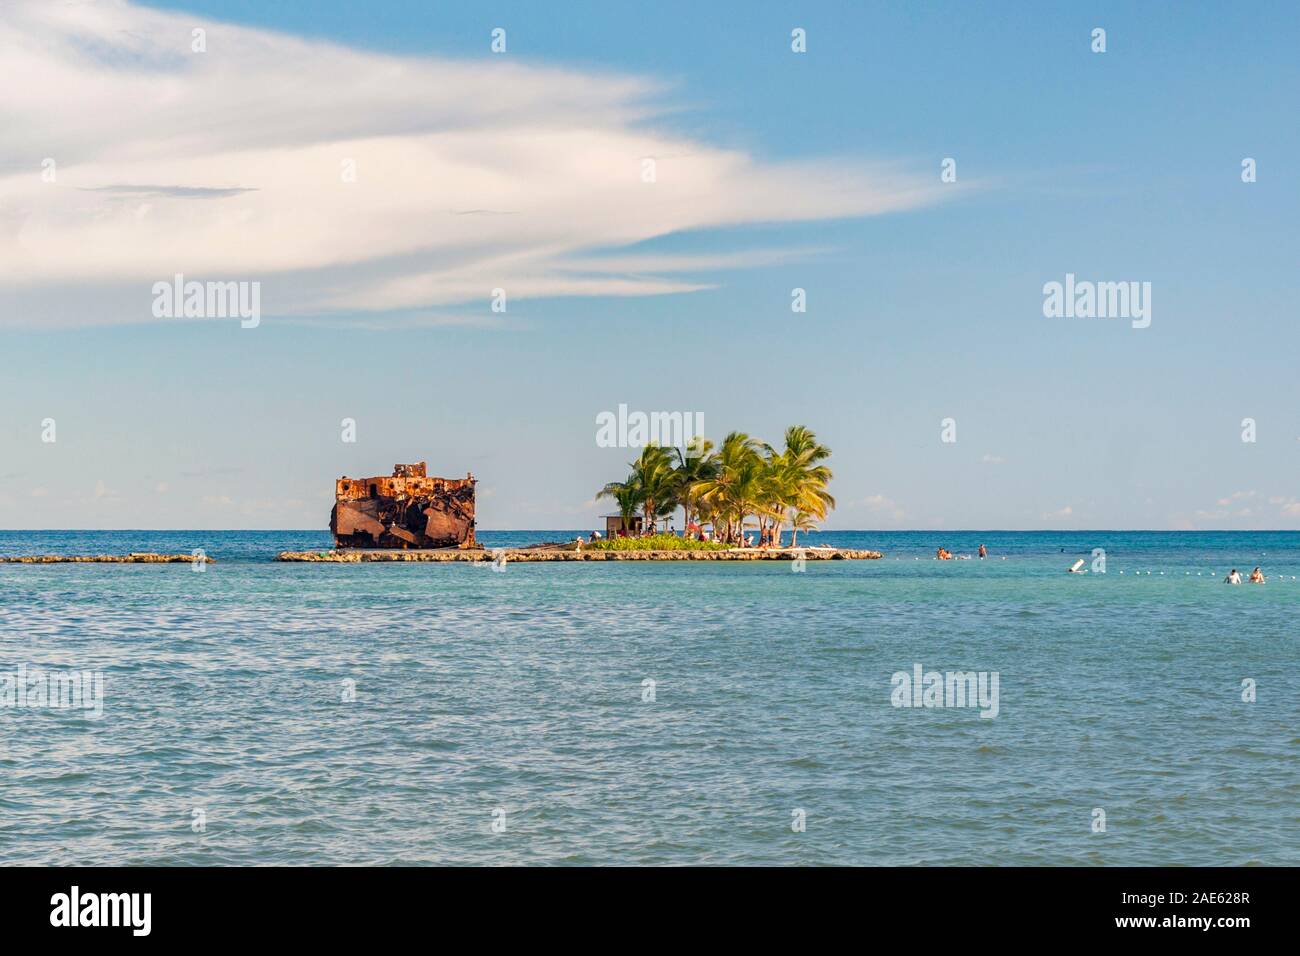 Islet and shipwreck off San Luis on the coast of the island of San Andres, Colombia. Stock Photo